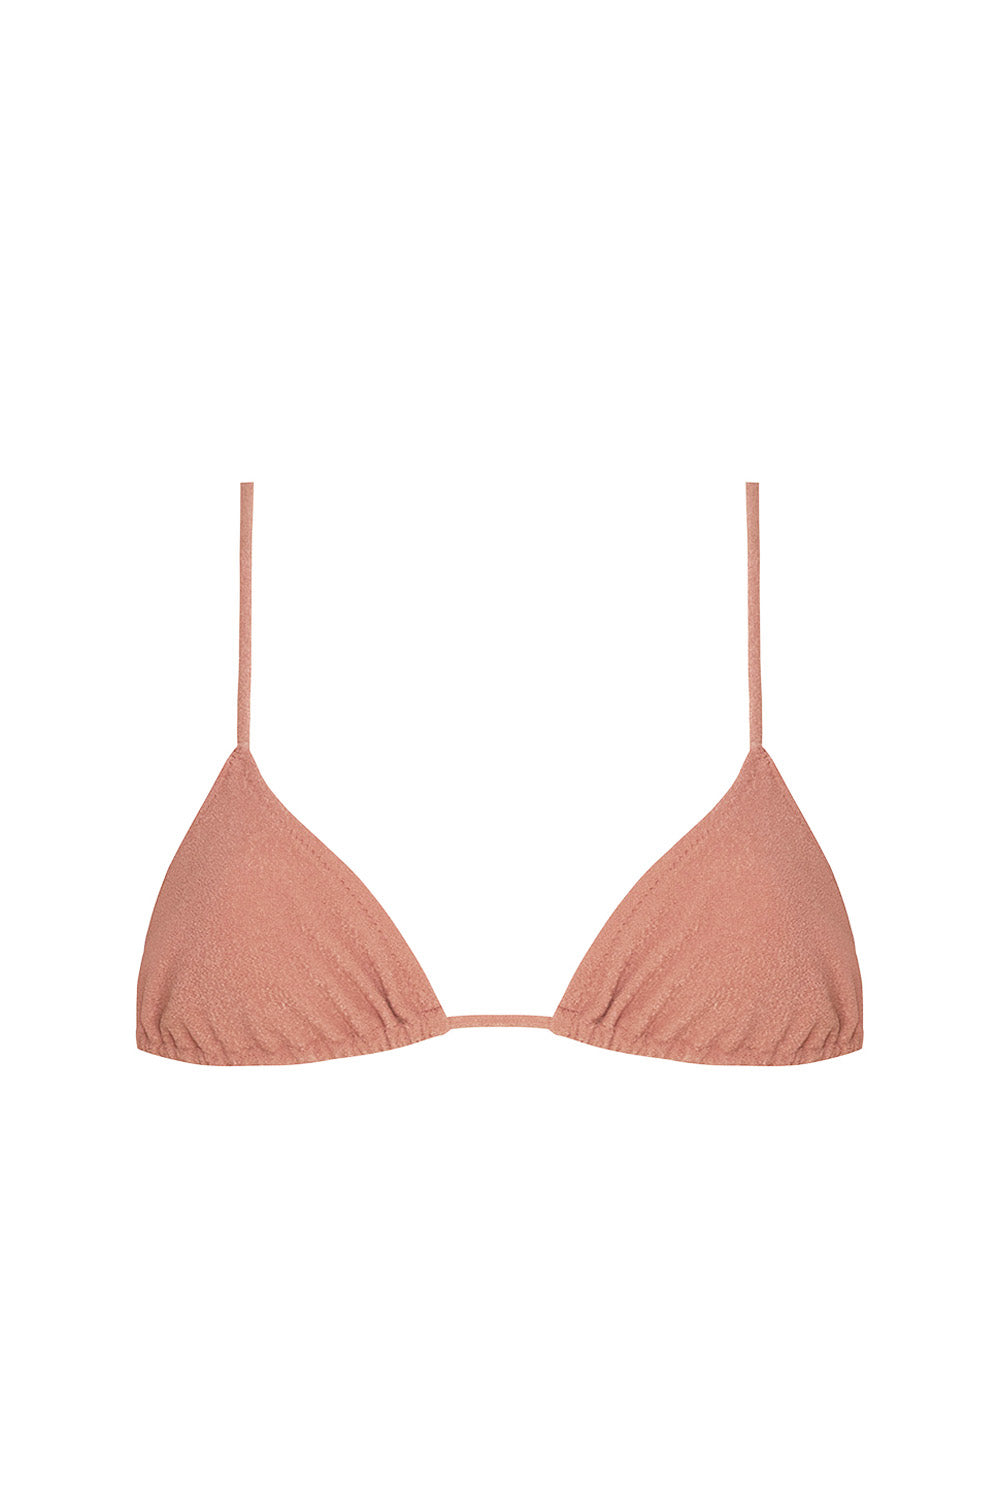 equator top in blush eco terry – tropic of c